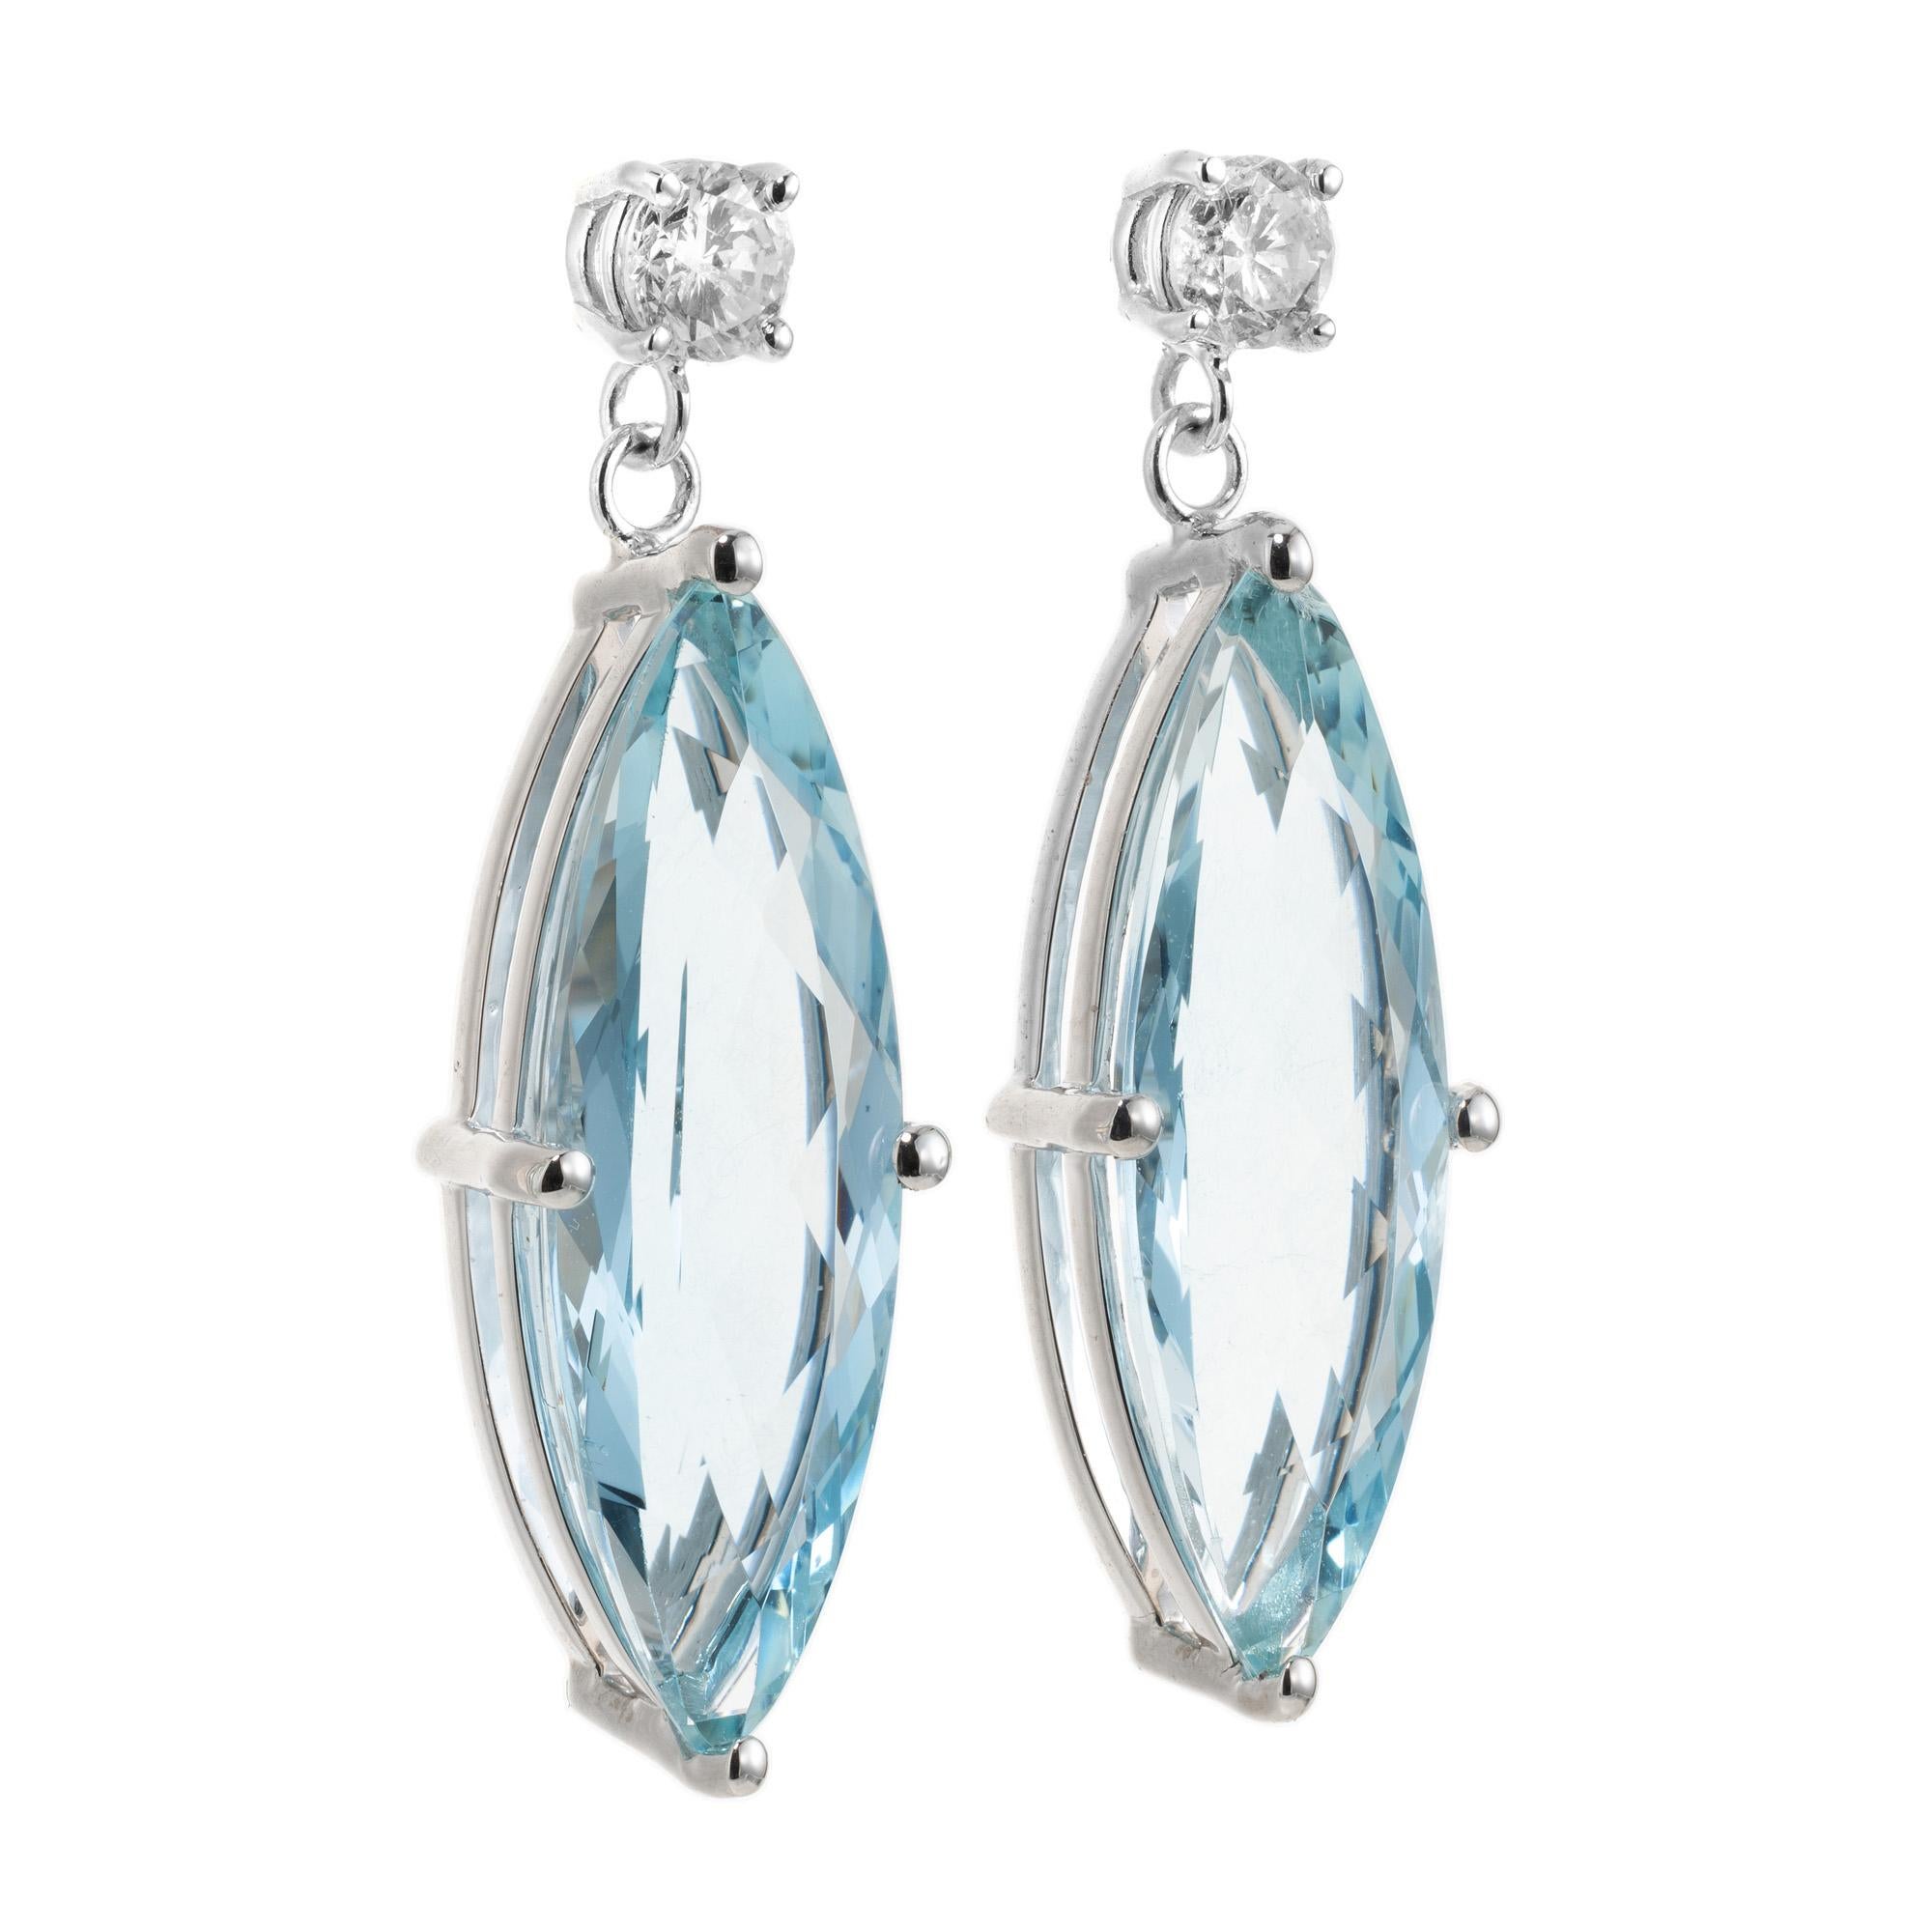 7.49 Carat Aquamarine Diamond White Gold Dangle Earrings. The centerpiece of these earrings are two exquisite marquise  aquamarine gemstones with a captivating pale blue hue. The aquamarines are beautifully accentuated a round cut diamond at the top